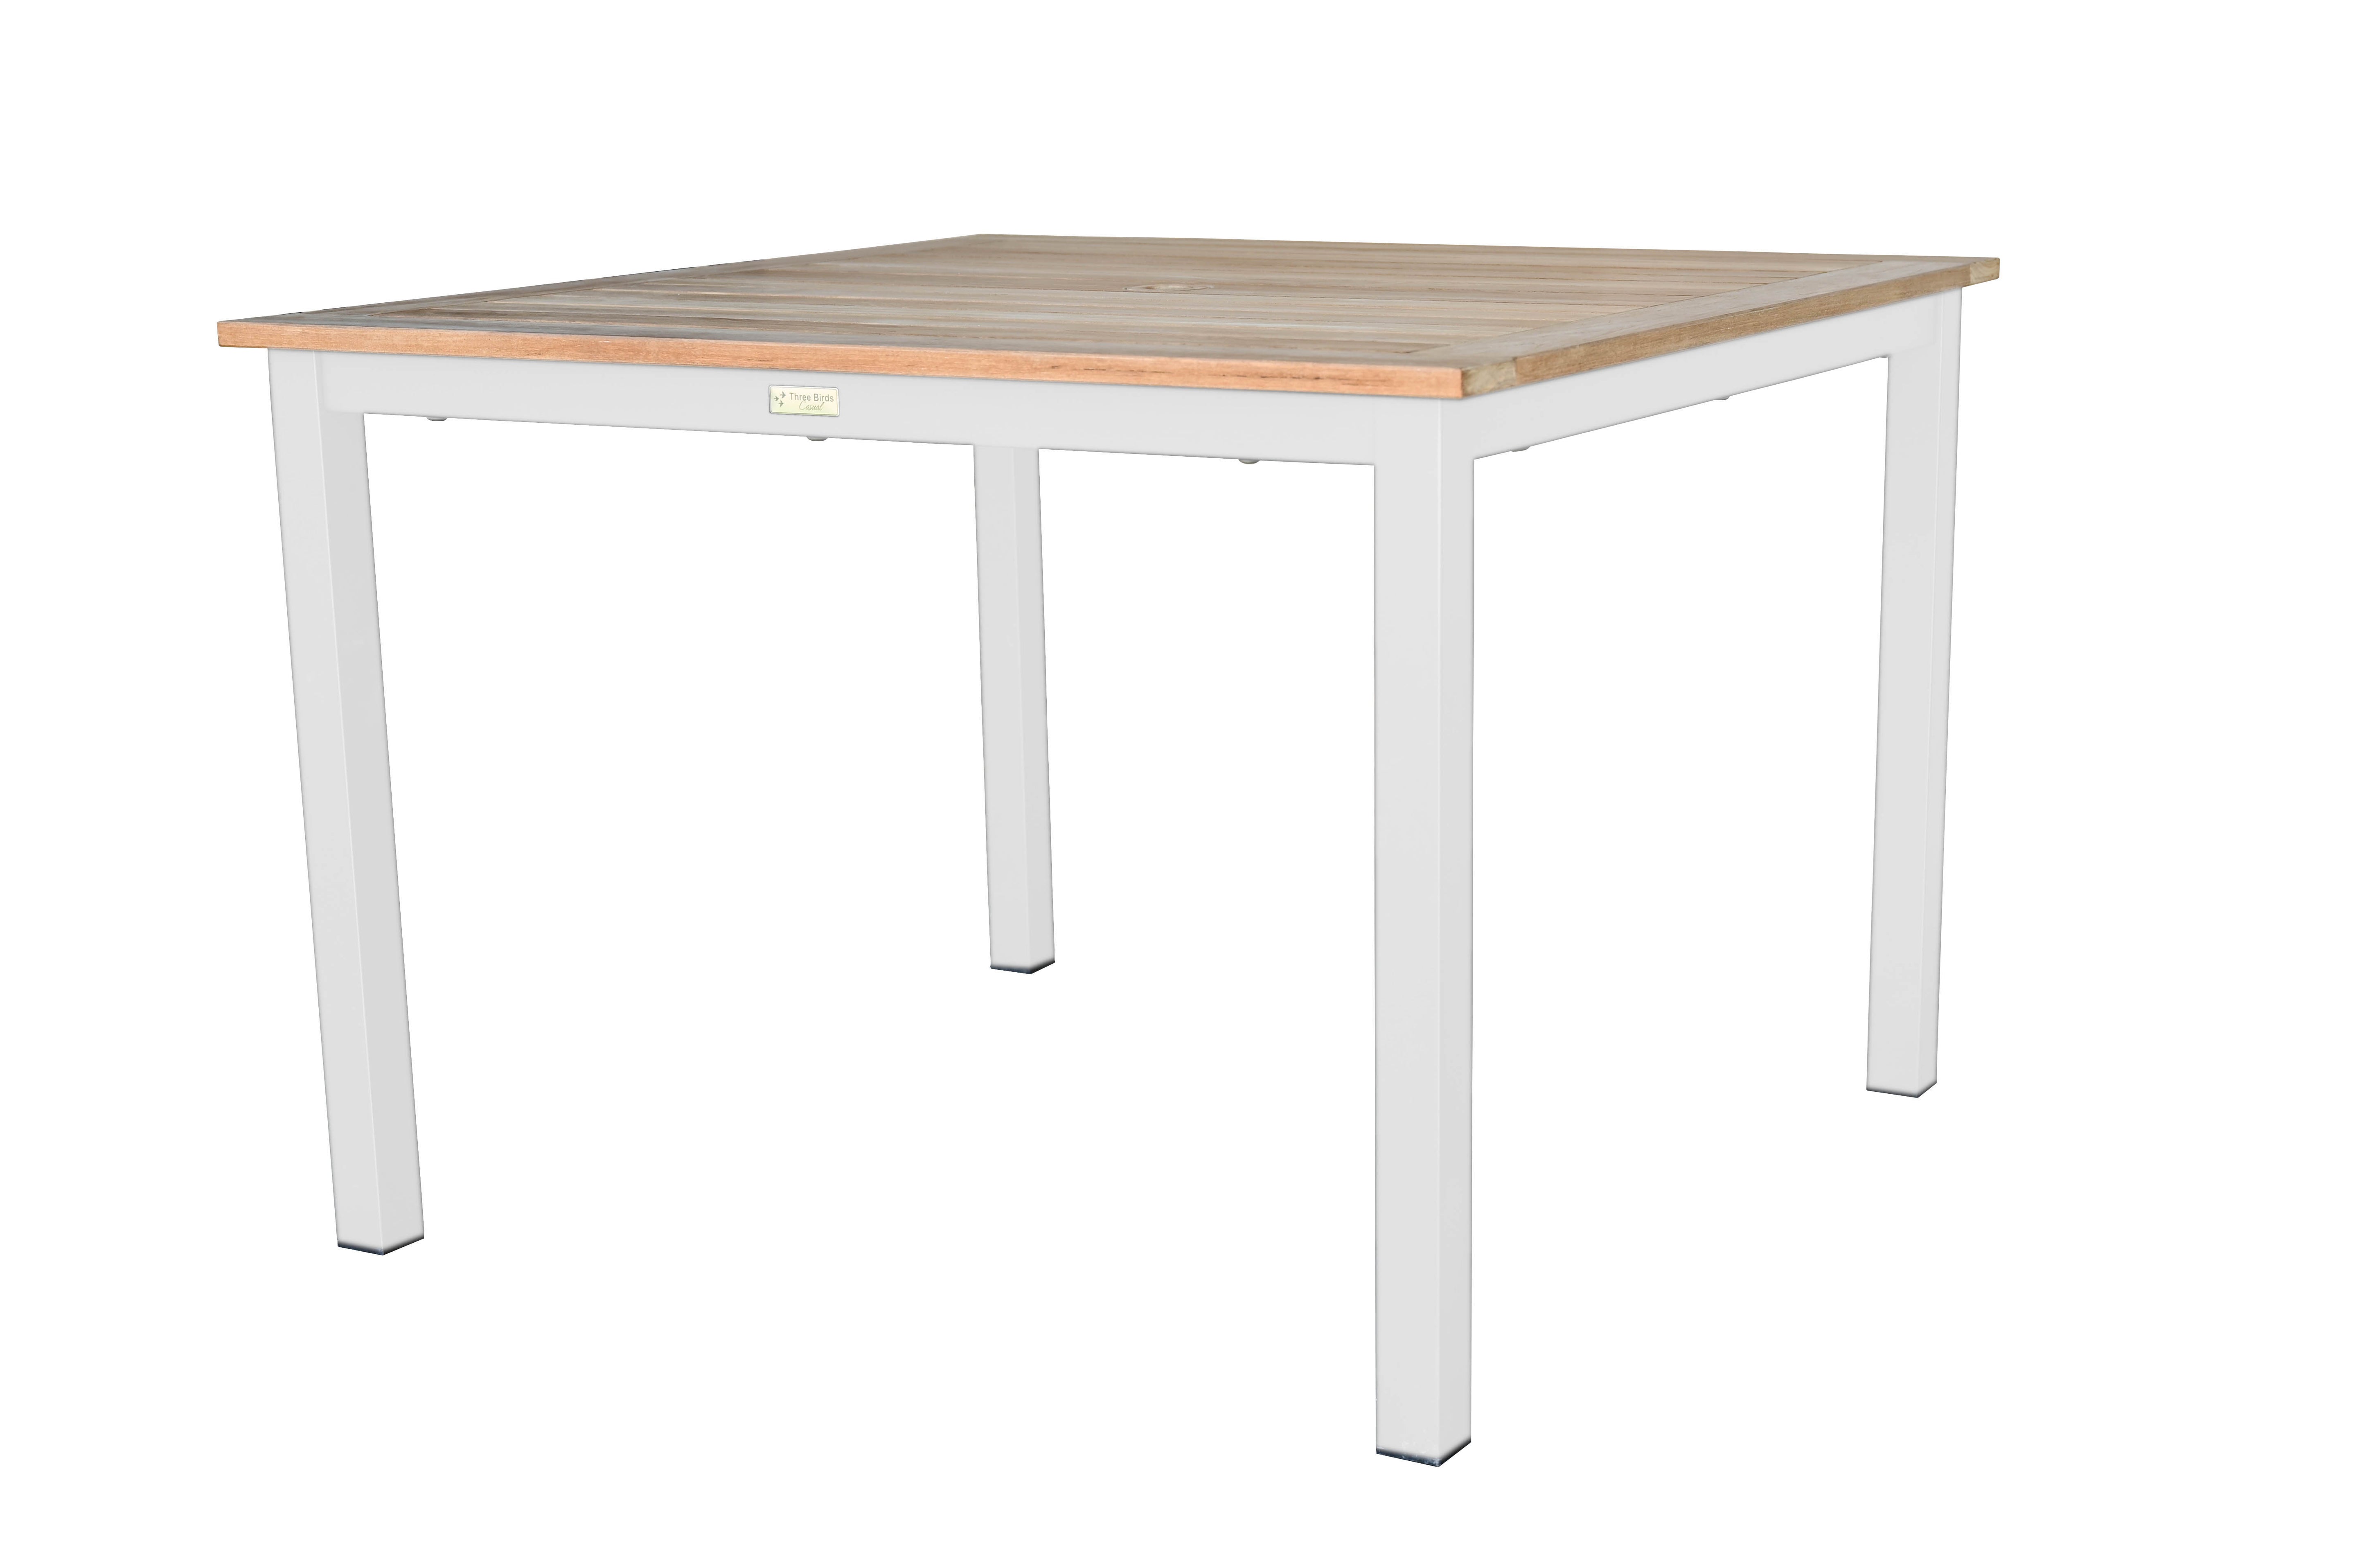 SoHo 42" Square Dining Table